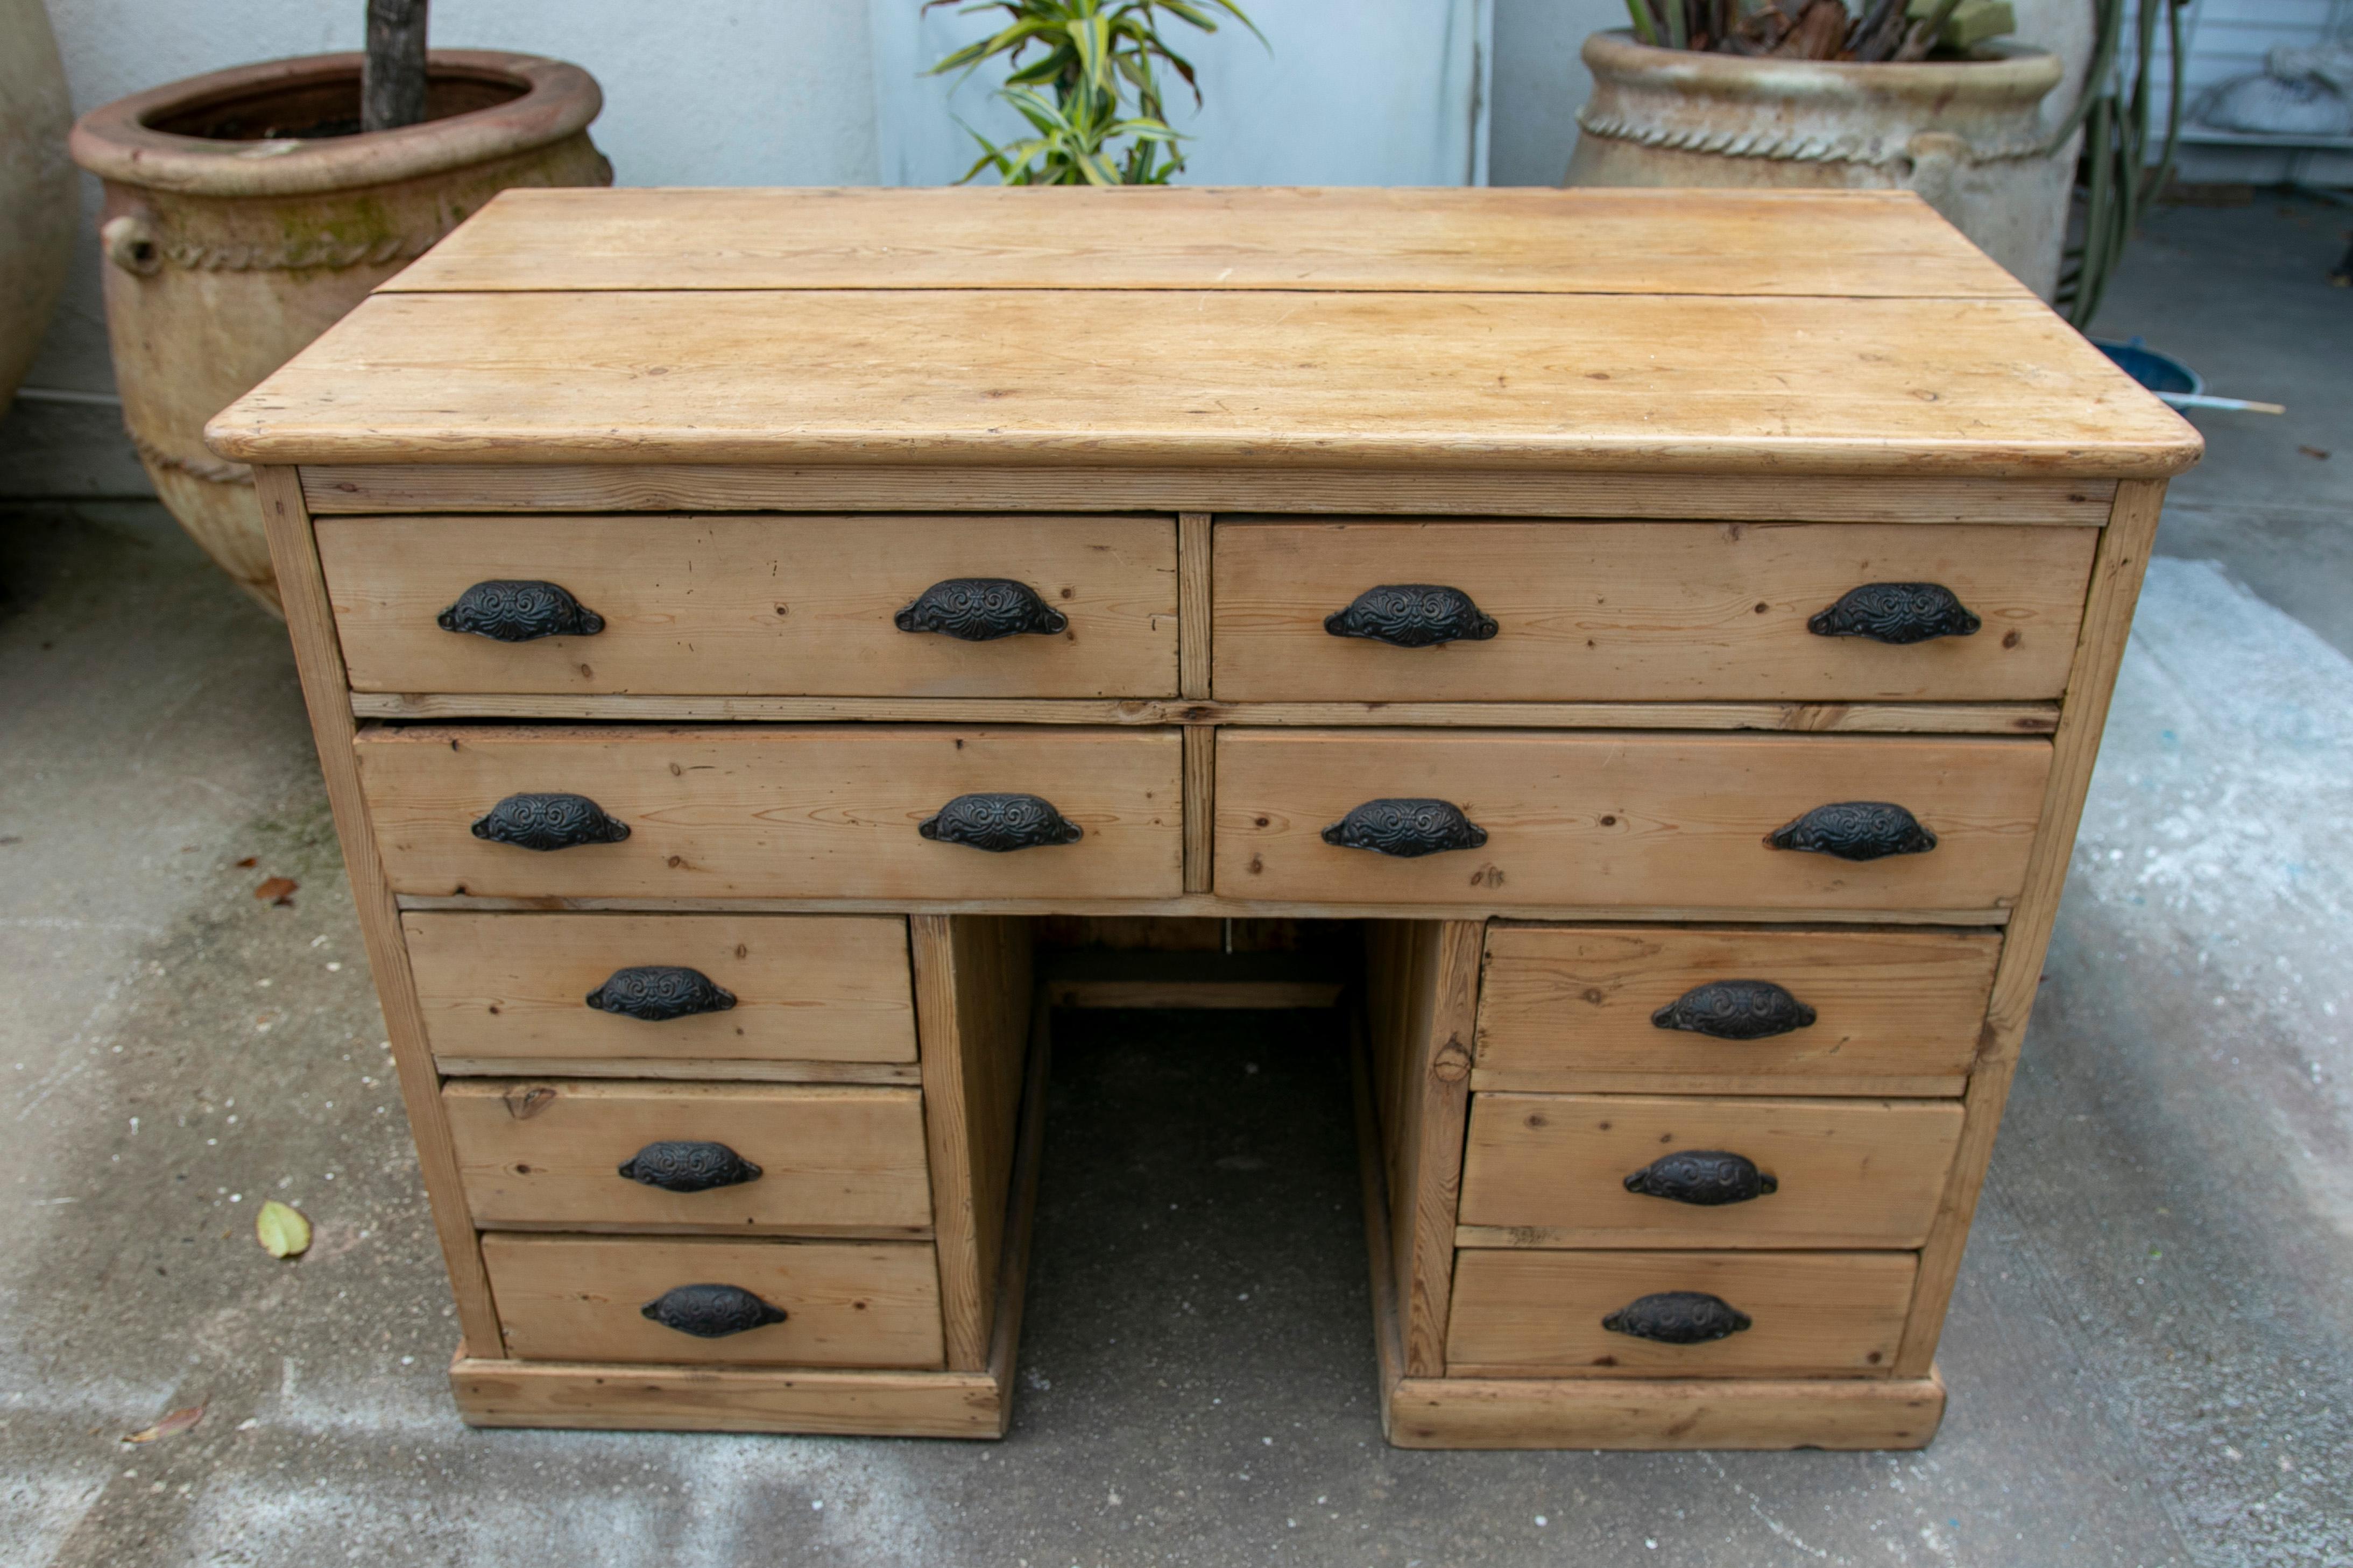 Spanish wooden desk with ten drawers and iron pulls.